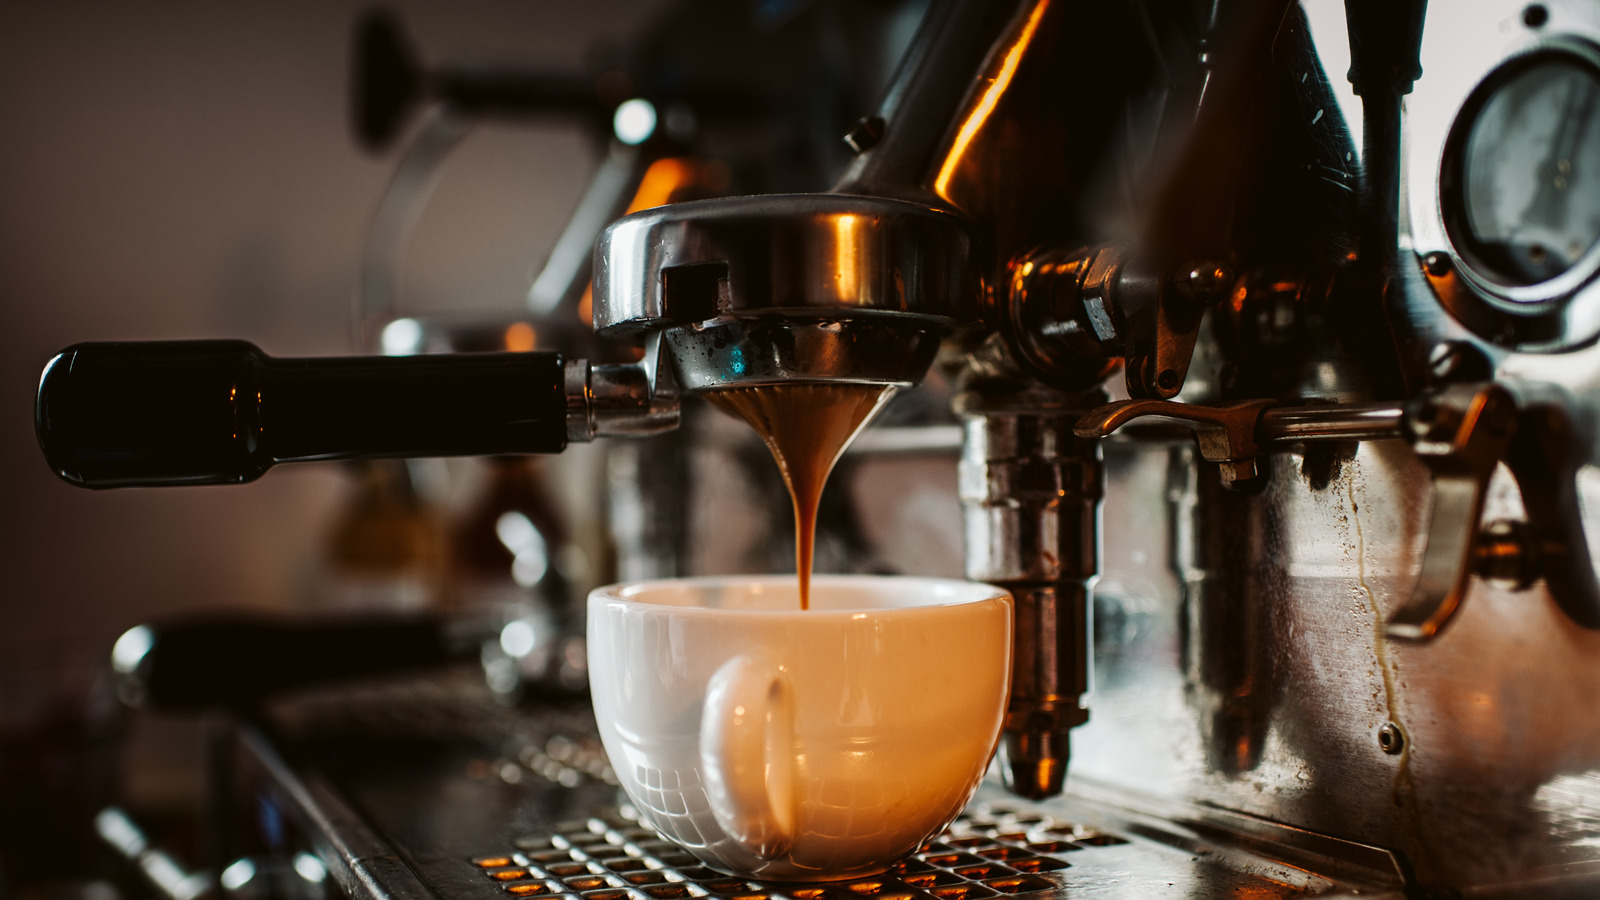 De' Longhi teams up with La Marzocco to boost coffee machine business